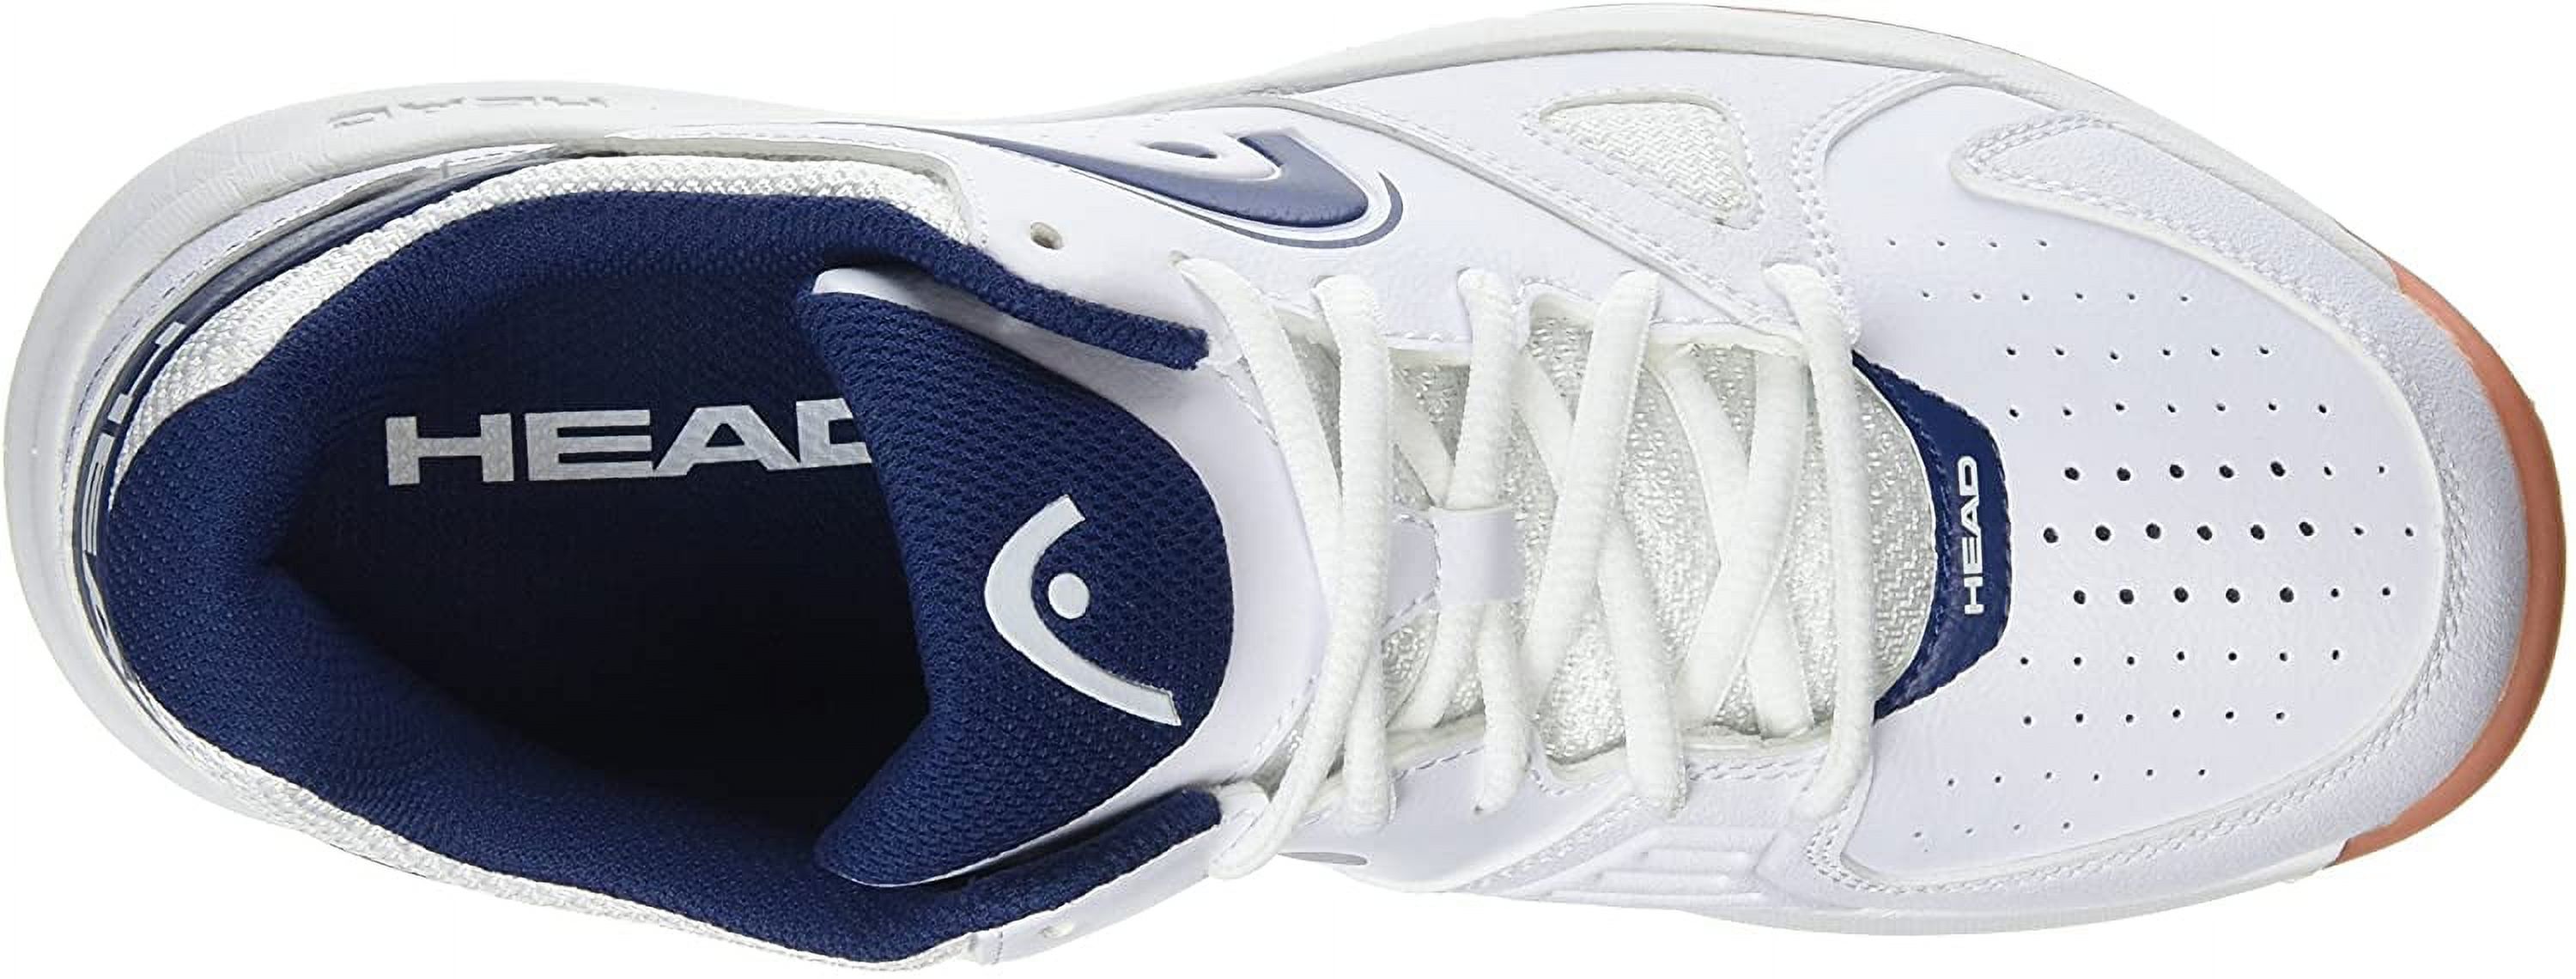 HEAD Men's Grid 2.0 Low Racquetball/Squash Indoor Court Shoes (Non-Marking) (White/Navy) 9.5 (D) US - image 5 of 7